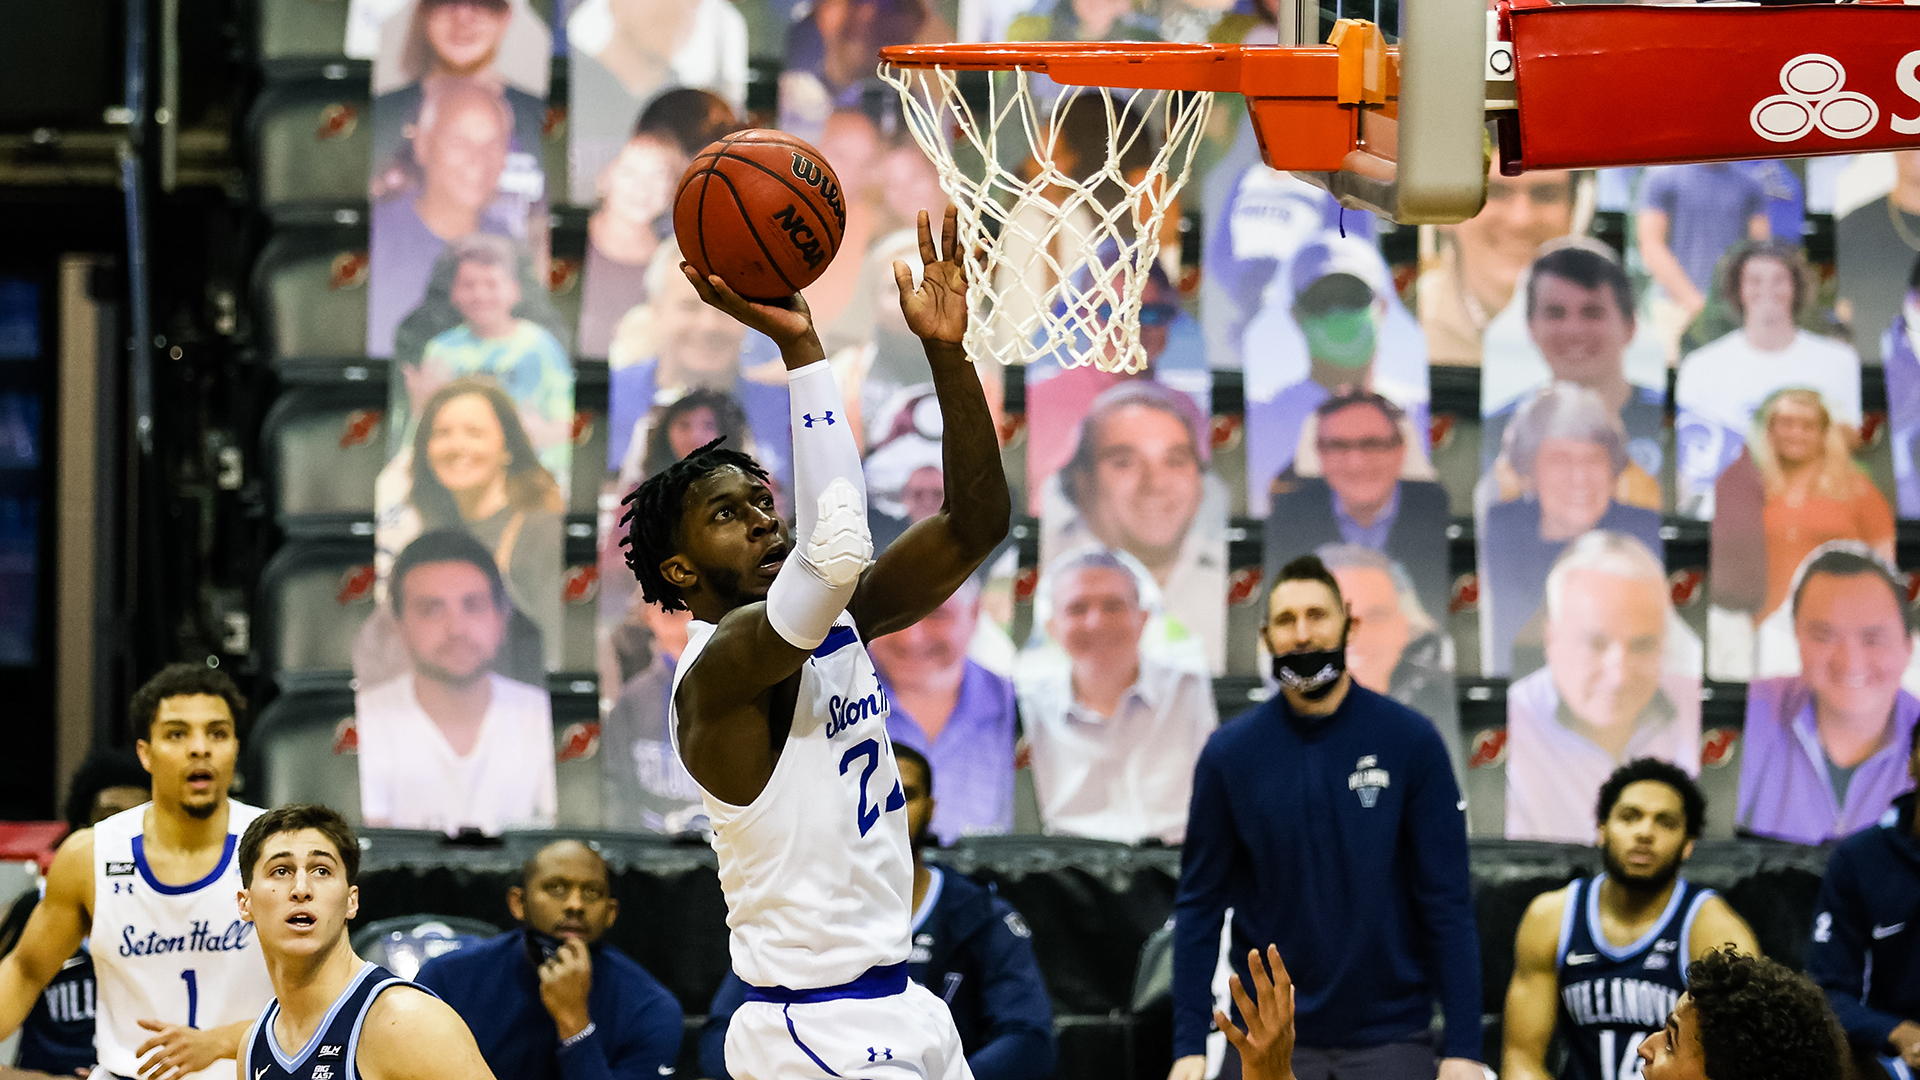 Myles Cale grabs a rebound and attempts to score a layup during a Seton Hall basketball game.